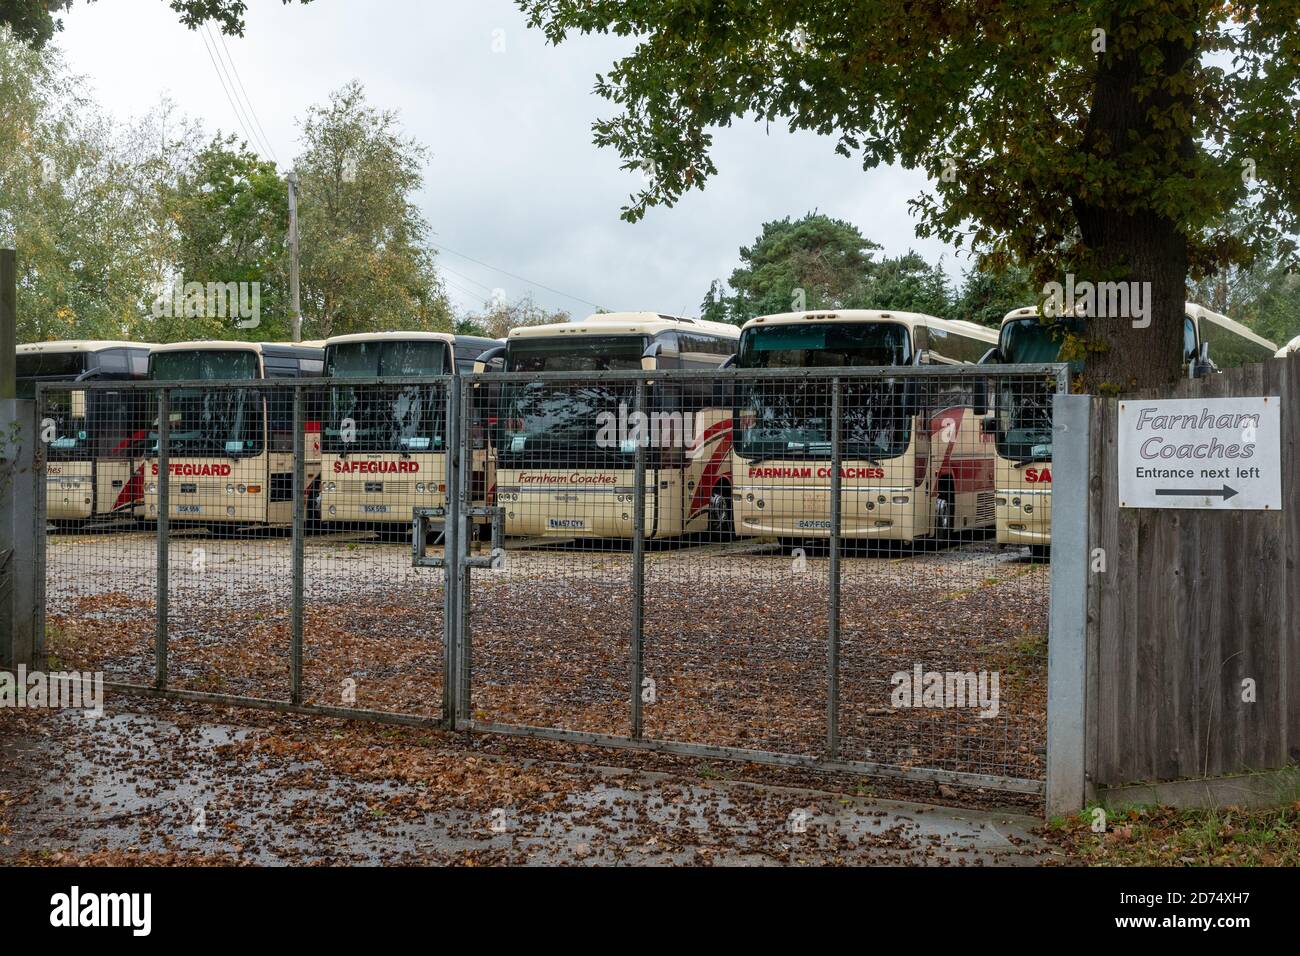 Surrey, UK. 20th October, 2020. A row of coaches belonging to operator Farnham Coaches parked in a locked yard. The coronavirus Covid-19 pandemic has resulted in a greatly reduced number of coach trips and holidays taking place this year due to problems with social distancing on public transport, and many coach operators are in financial difficulty. The UK government furlough scheme has supported staff until now and kept them in employment, but is about to finish at the end of this month. Stock Photo